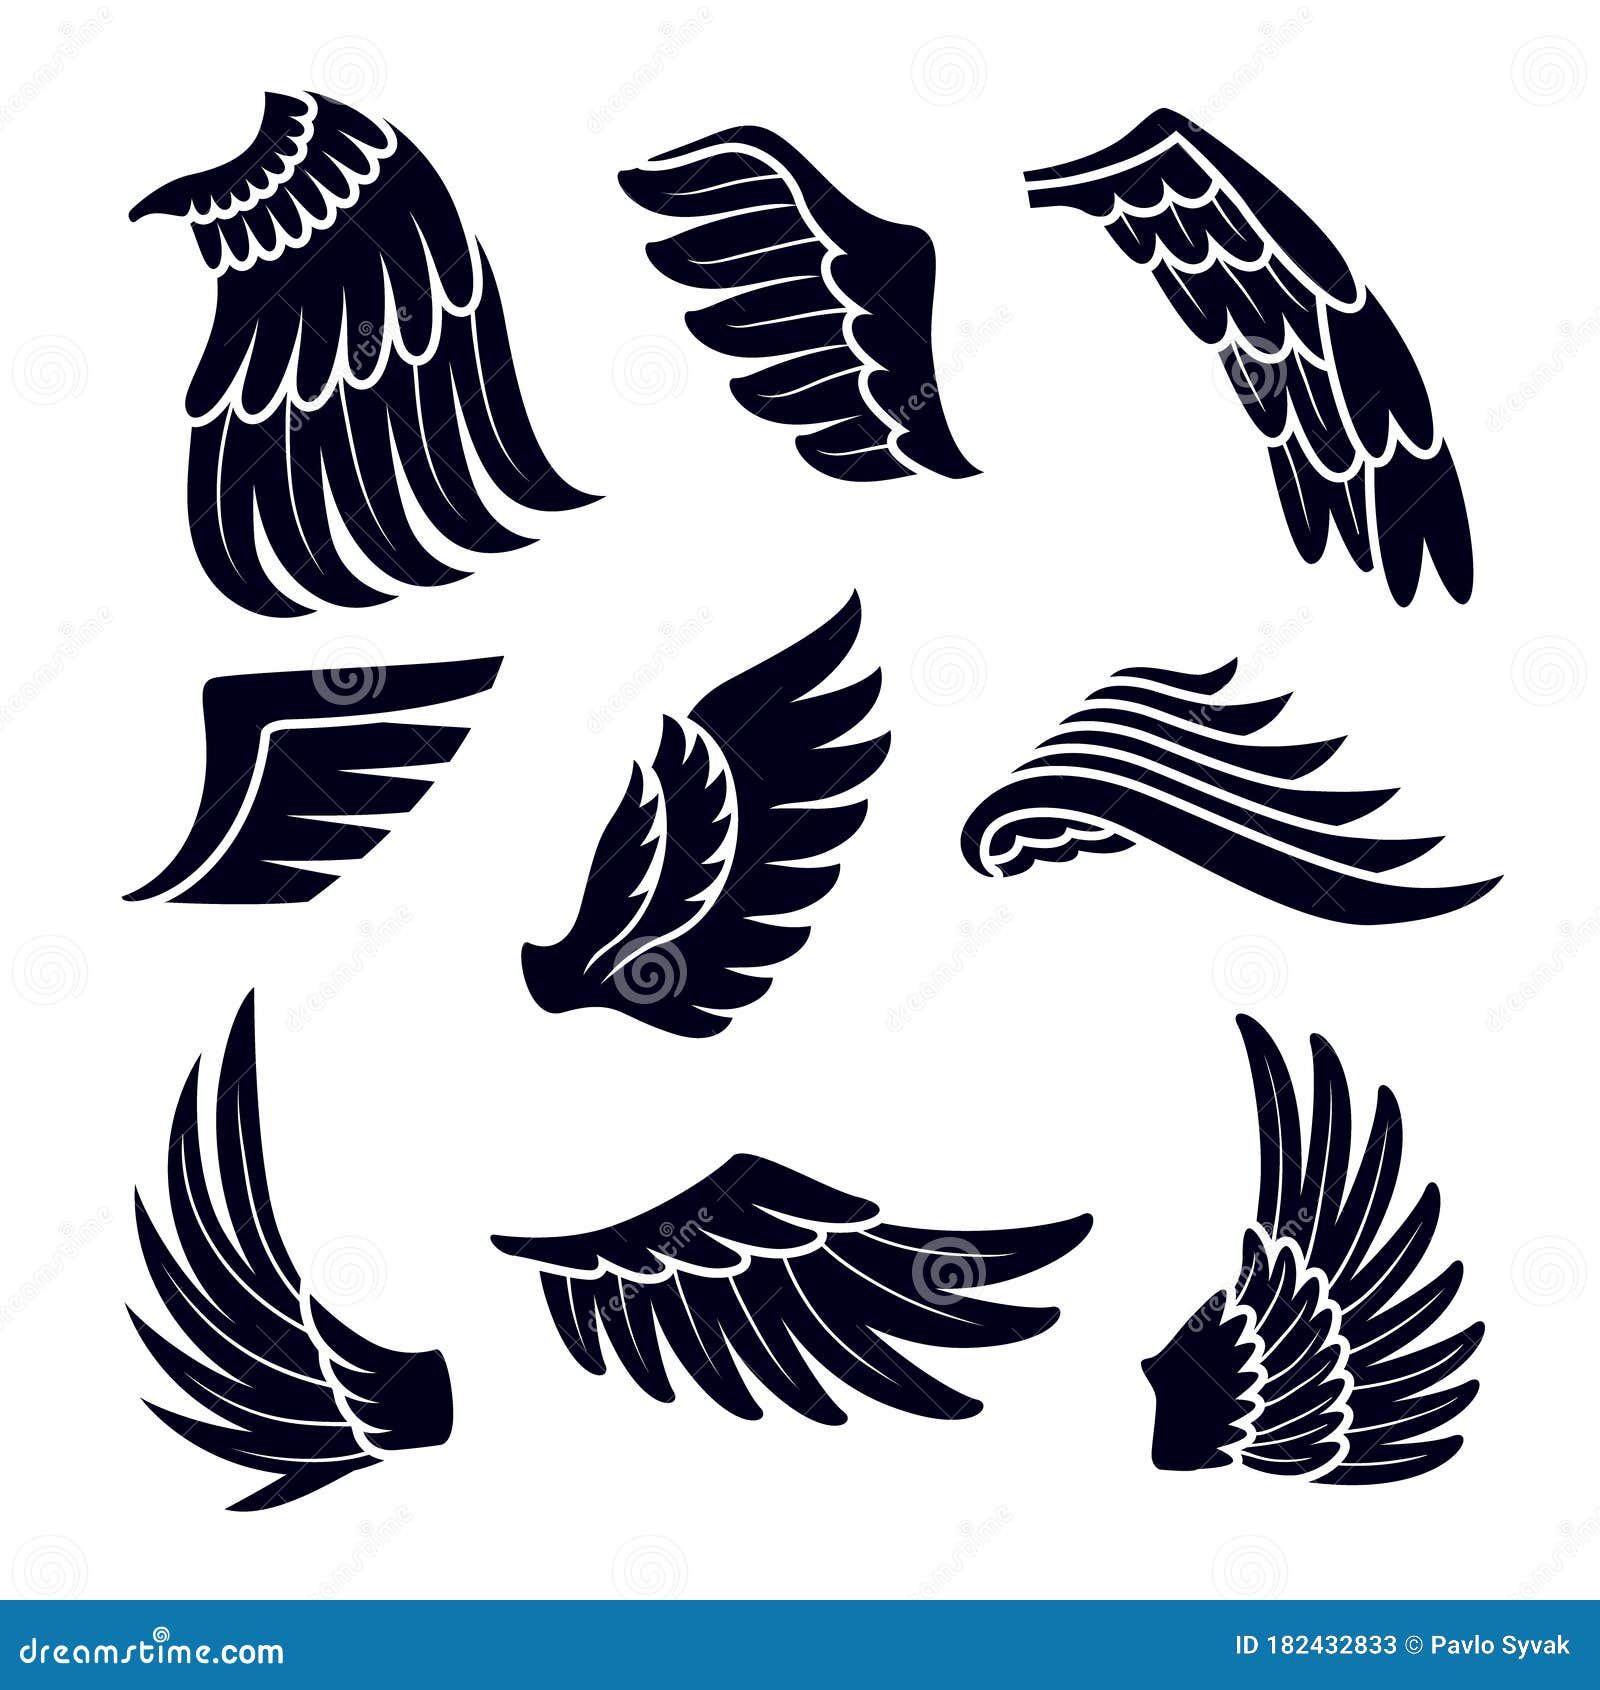 Wings Black Silhouettes Icons Set Isolated on White Background. Birds or  Angel Emblem Design Elements Stock Vector - Illustration of background,  object: 182432833